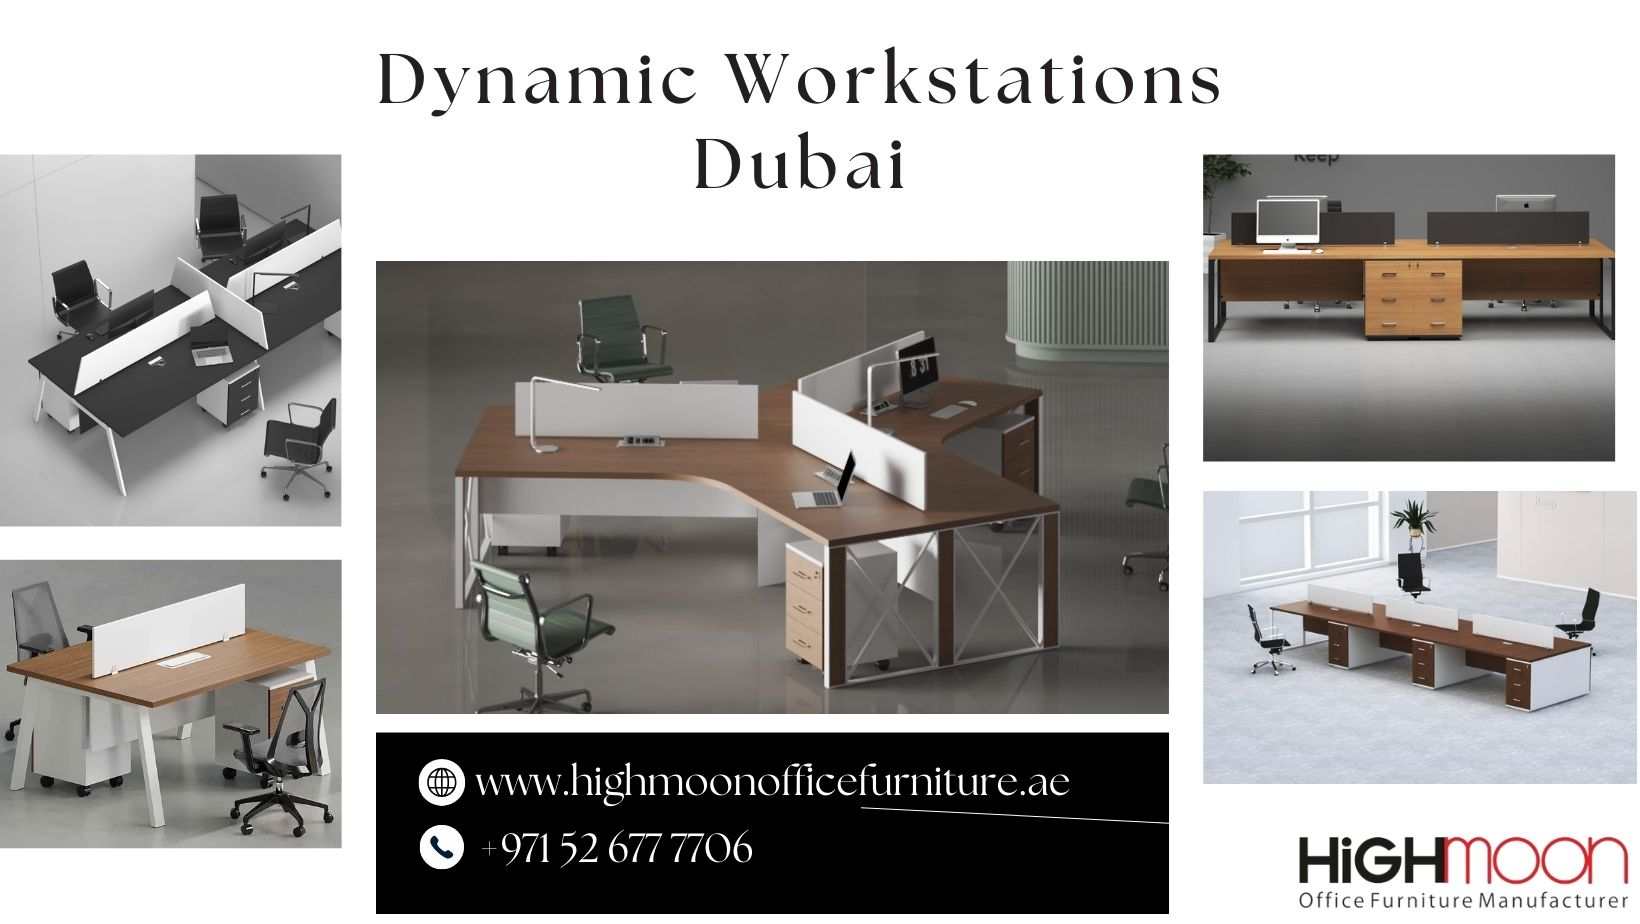 Shift your gears of creative thoughts & choose Highmoon’s dynamic office furniture workstations